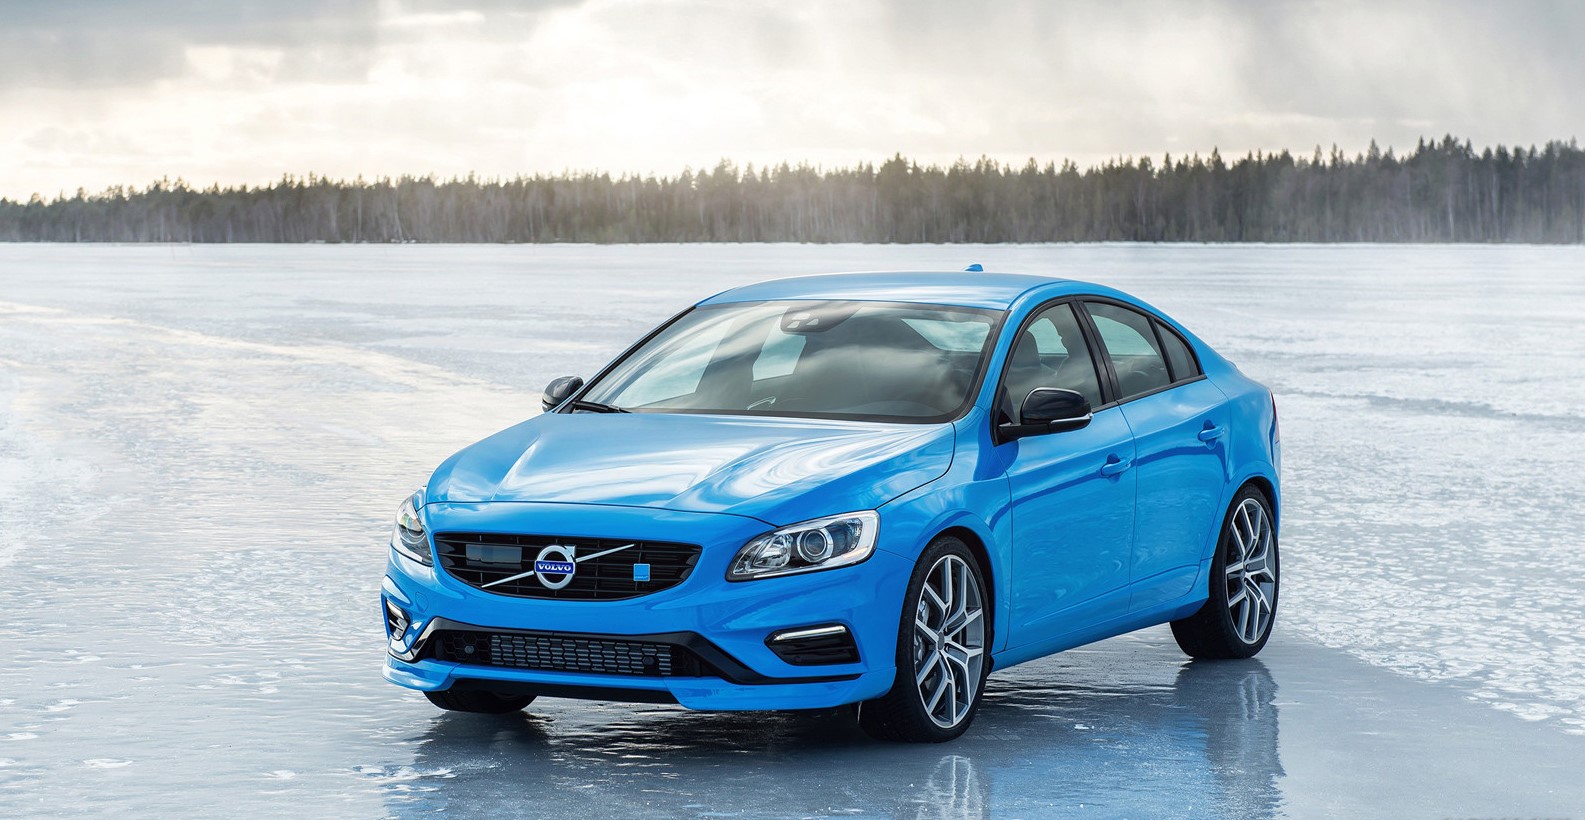 2017 Volvo S60 Polestar Launched in India front side profile